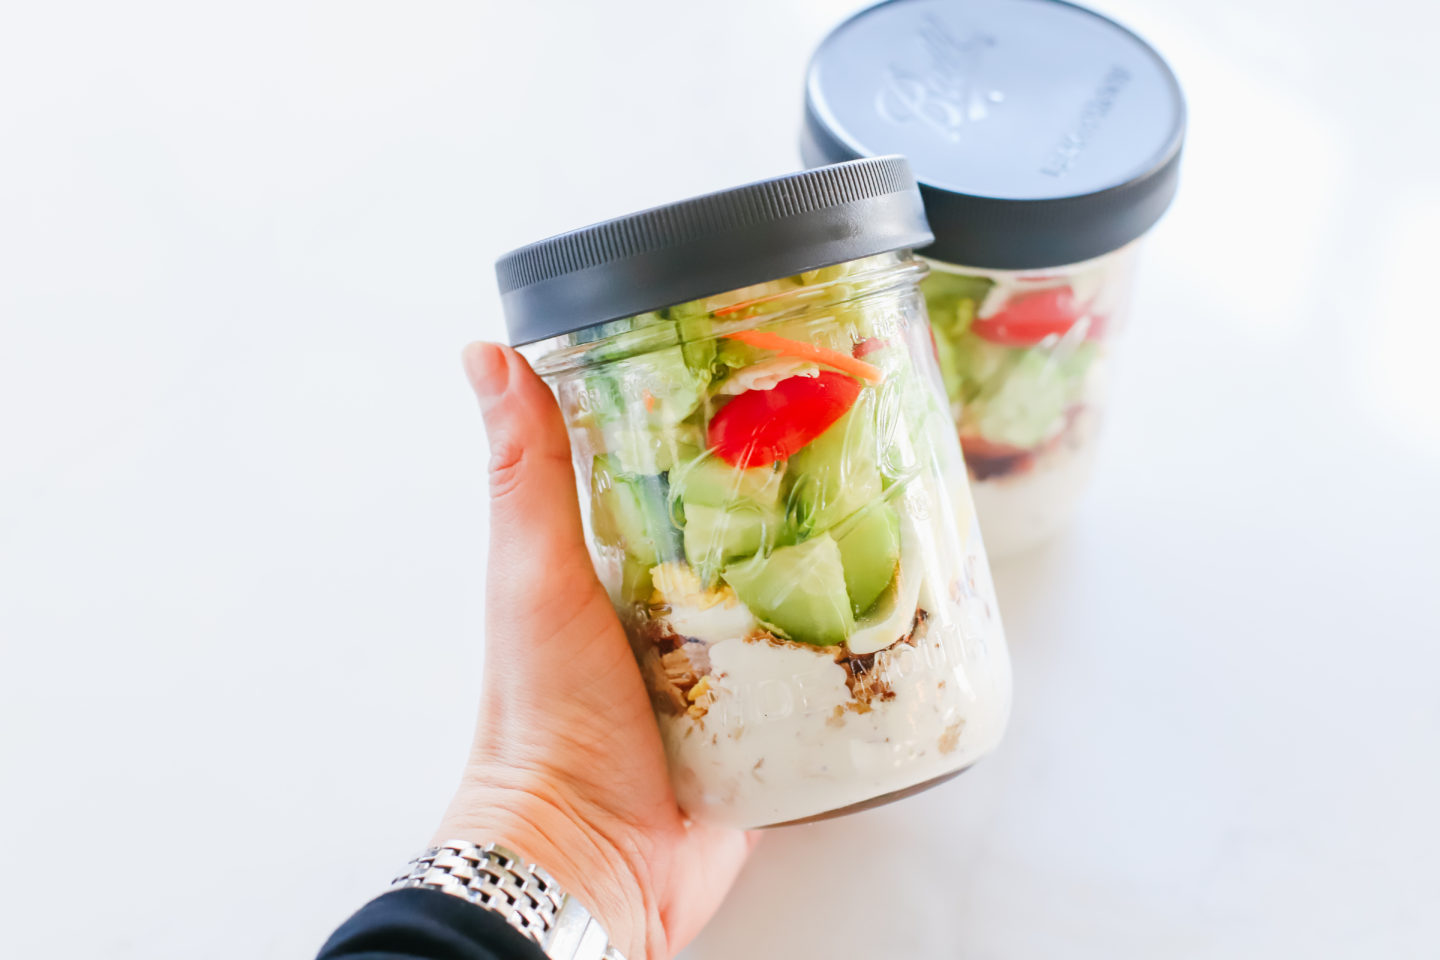 Meal prep with Ball® Jars to create the perfect Cobb Salad (Keto & Whole30® approved)! Add an easy and nutritious salad to your meal prep routine, always ready to go to help you stay on track! It's the perfect mason jar salad. #ad #Whole30WithBall #MadeWithBall #BallJars #Whole30Diet #BallInAJar @BallCanning